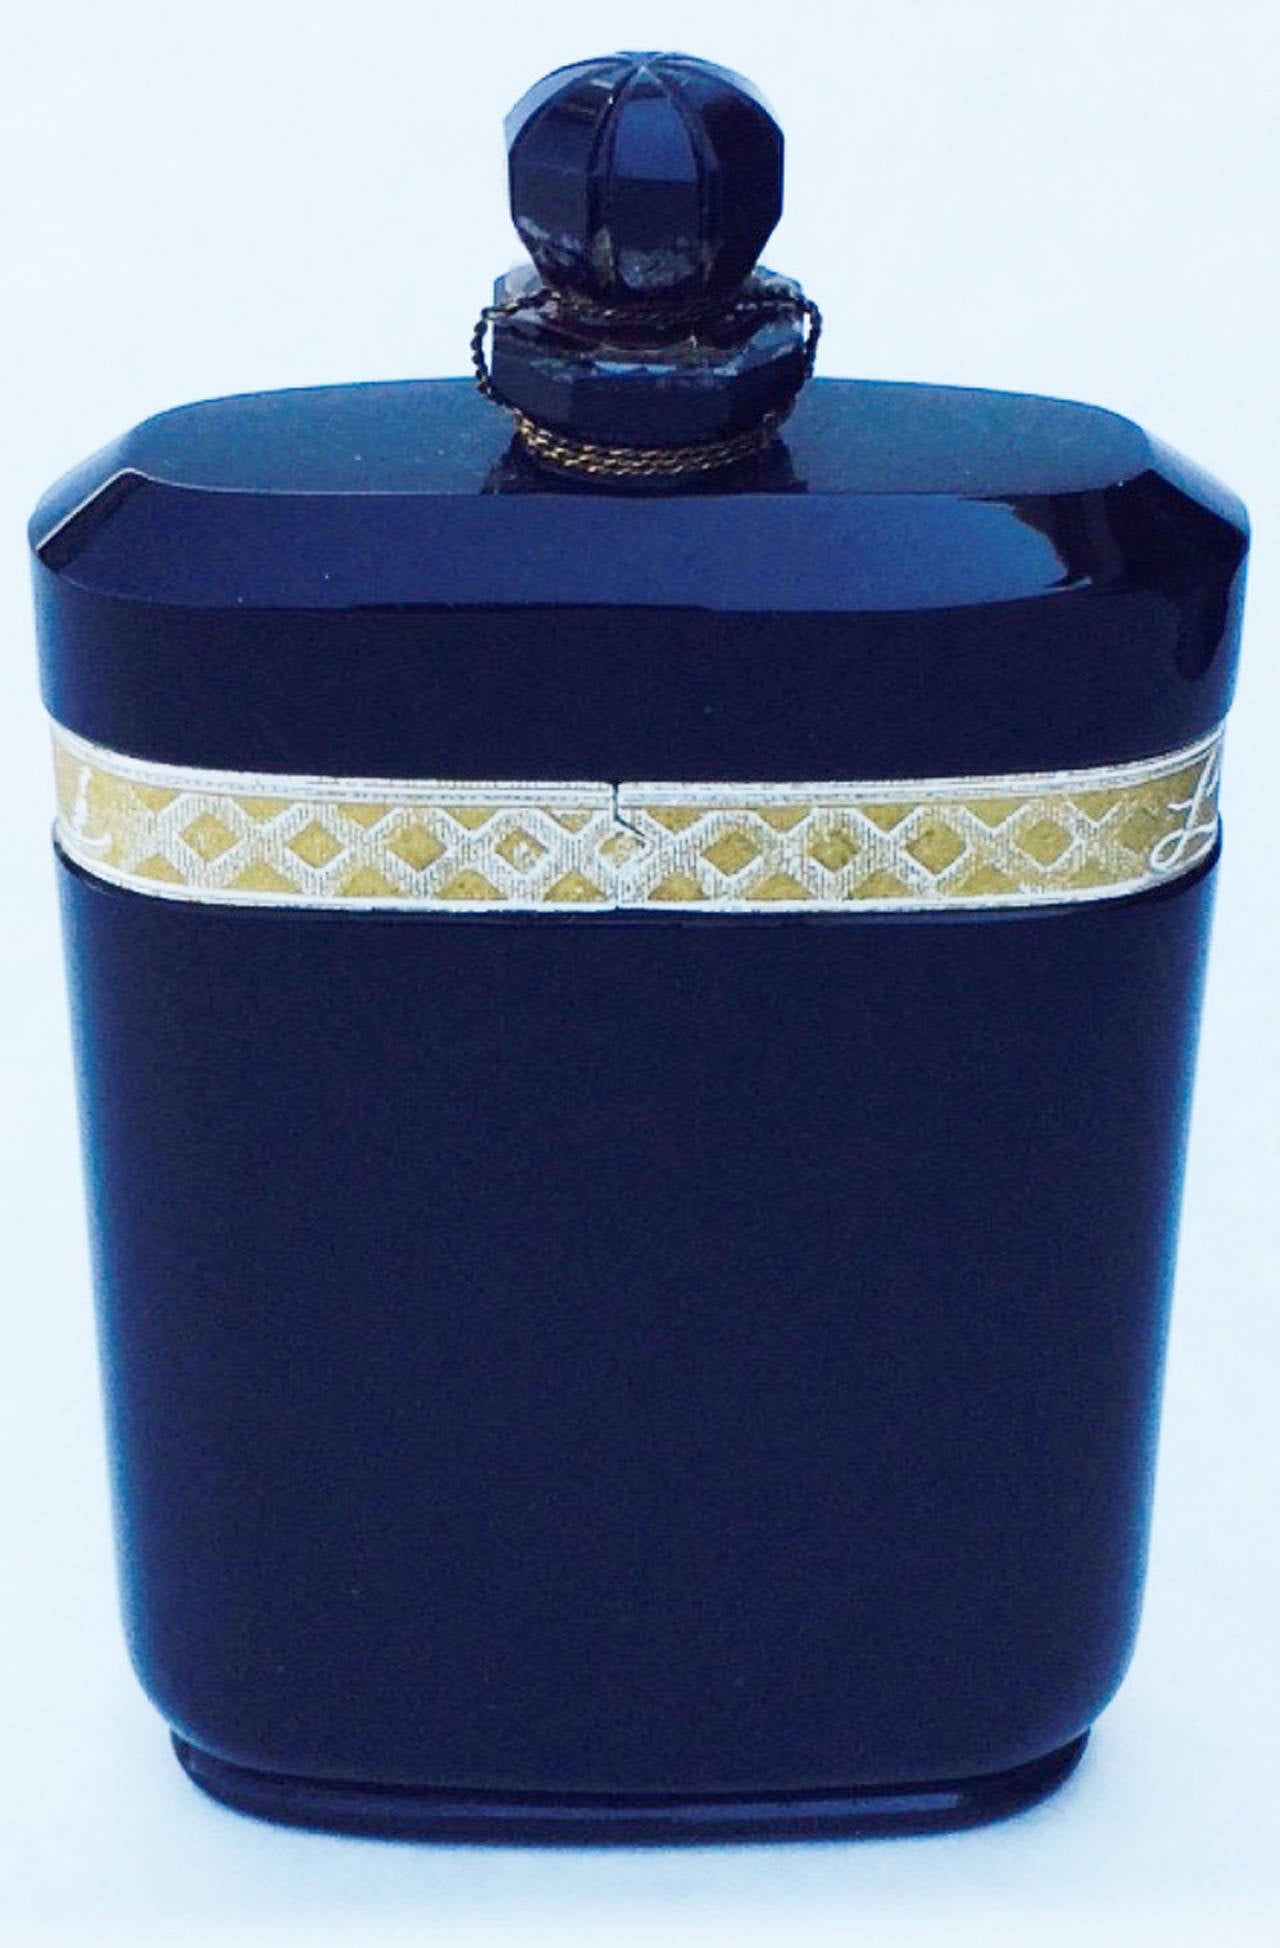 A fine and rare Nuit De Noel by Caron fragrance. Authentic French art deco bottle created by Baccarat, 1922 (hand numbered signature). Original contents and unopened seal intact. A rare survivor appropriate for any collection or archive.